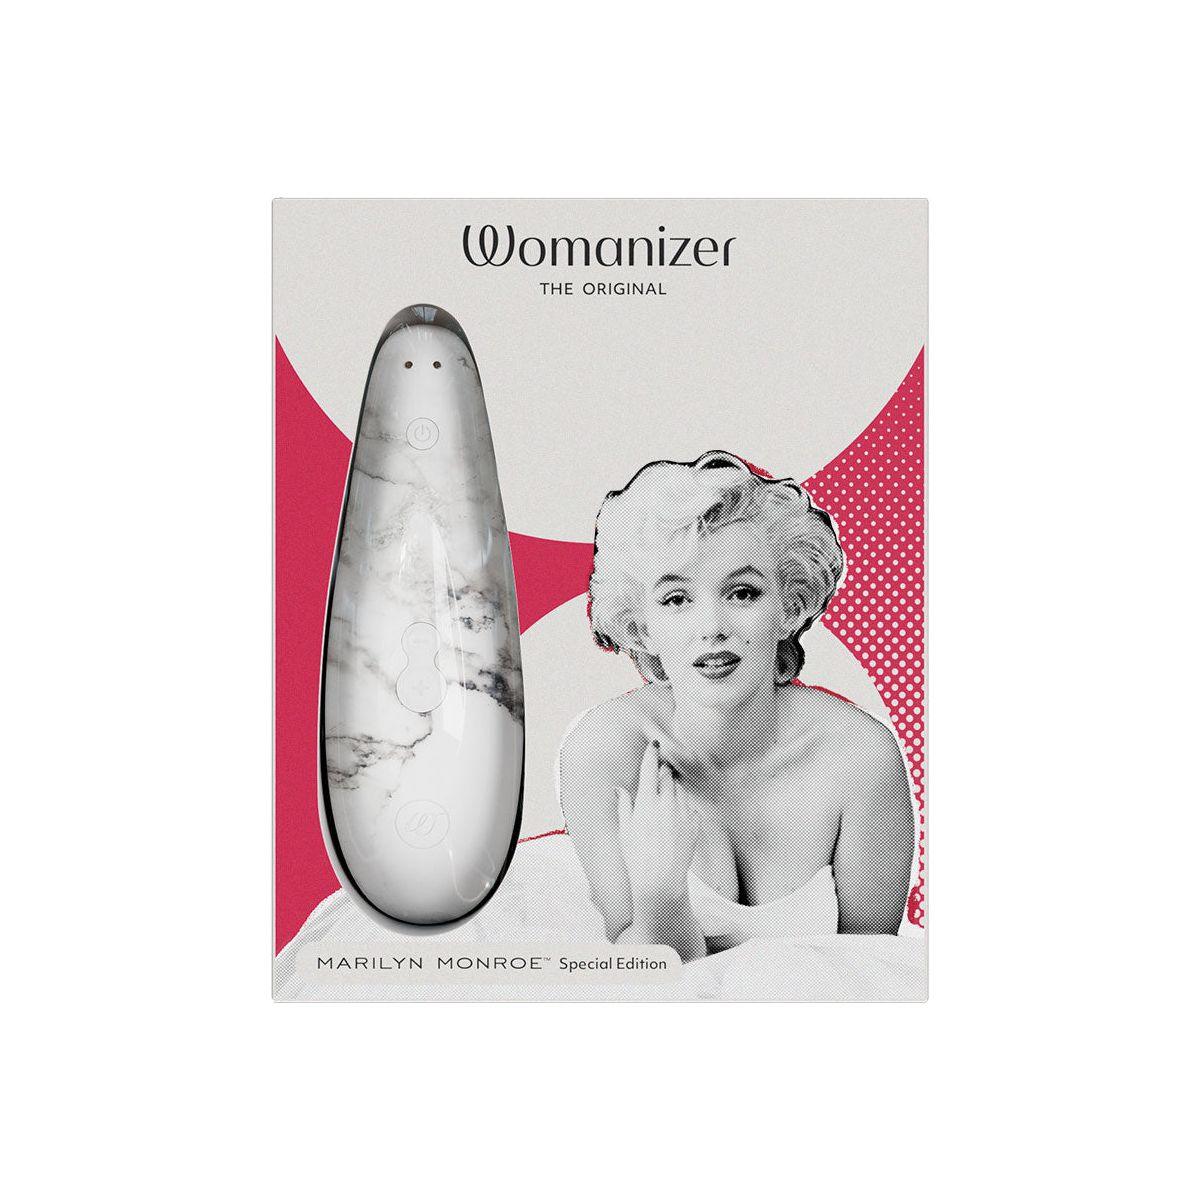 W*manizer Classic 2 Marilyn Monroe Special Edition - White Marble - shop enby